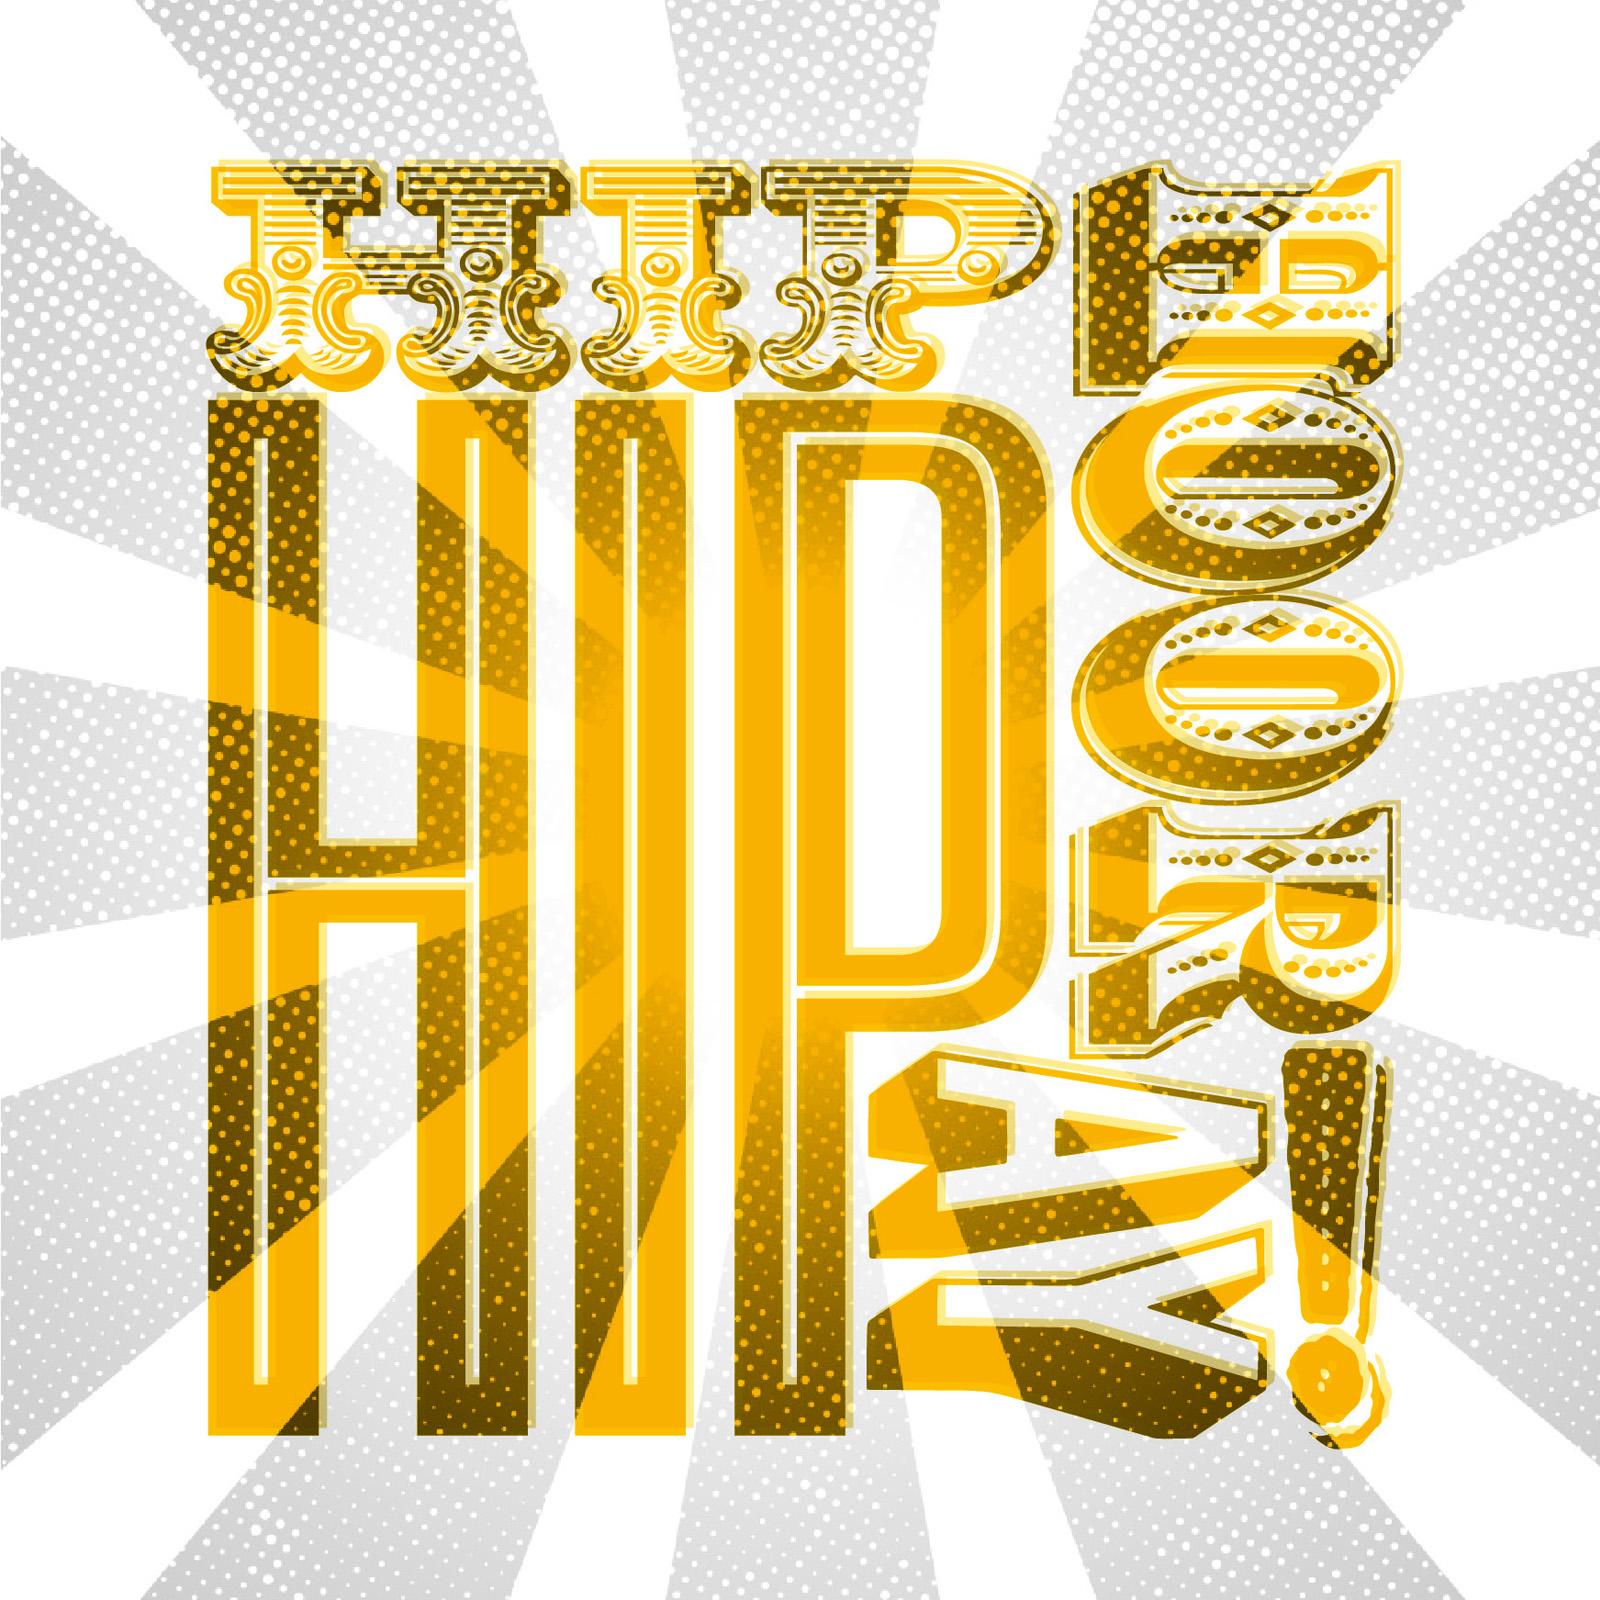 circus-style mix and match typography that reads hip hip hooray in yellow with a grey-coloured distressed starburst background